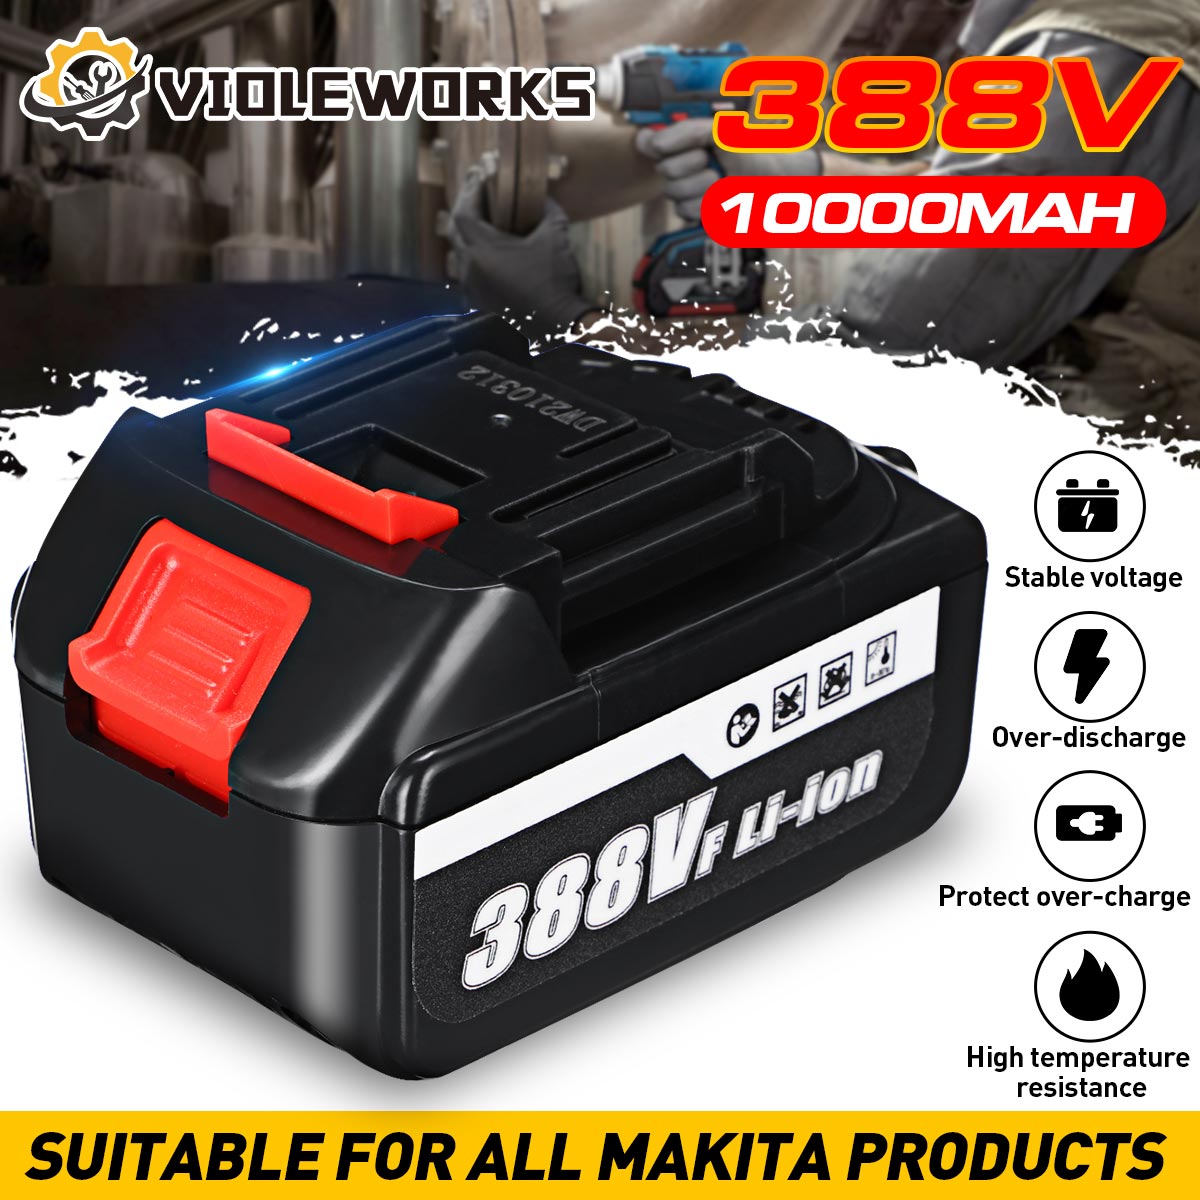 388v-18650-10000mAh-Lithium-ion-Battery-For-Tools-Angle-Grinder-Electromechanical-Drill-1940875-1